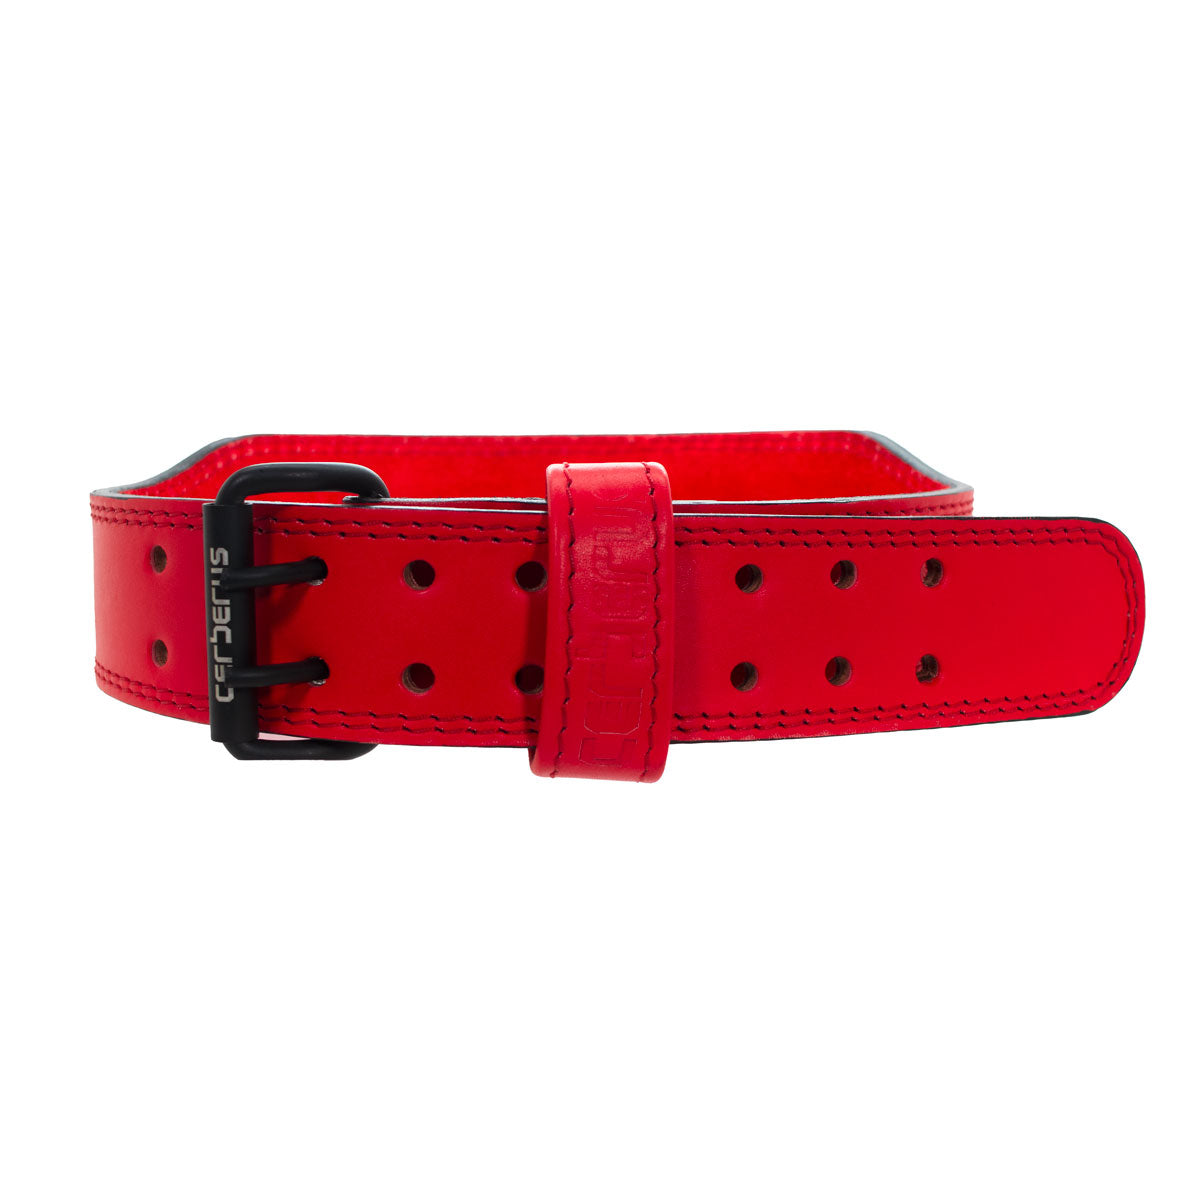 Classic Olympic Weightlifting Belt by CERBERUS Strength